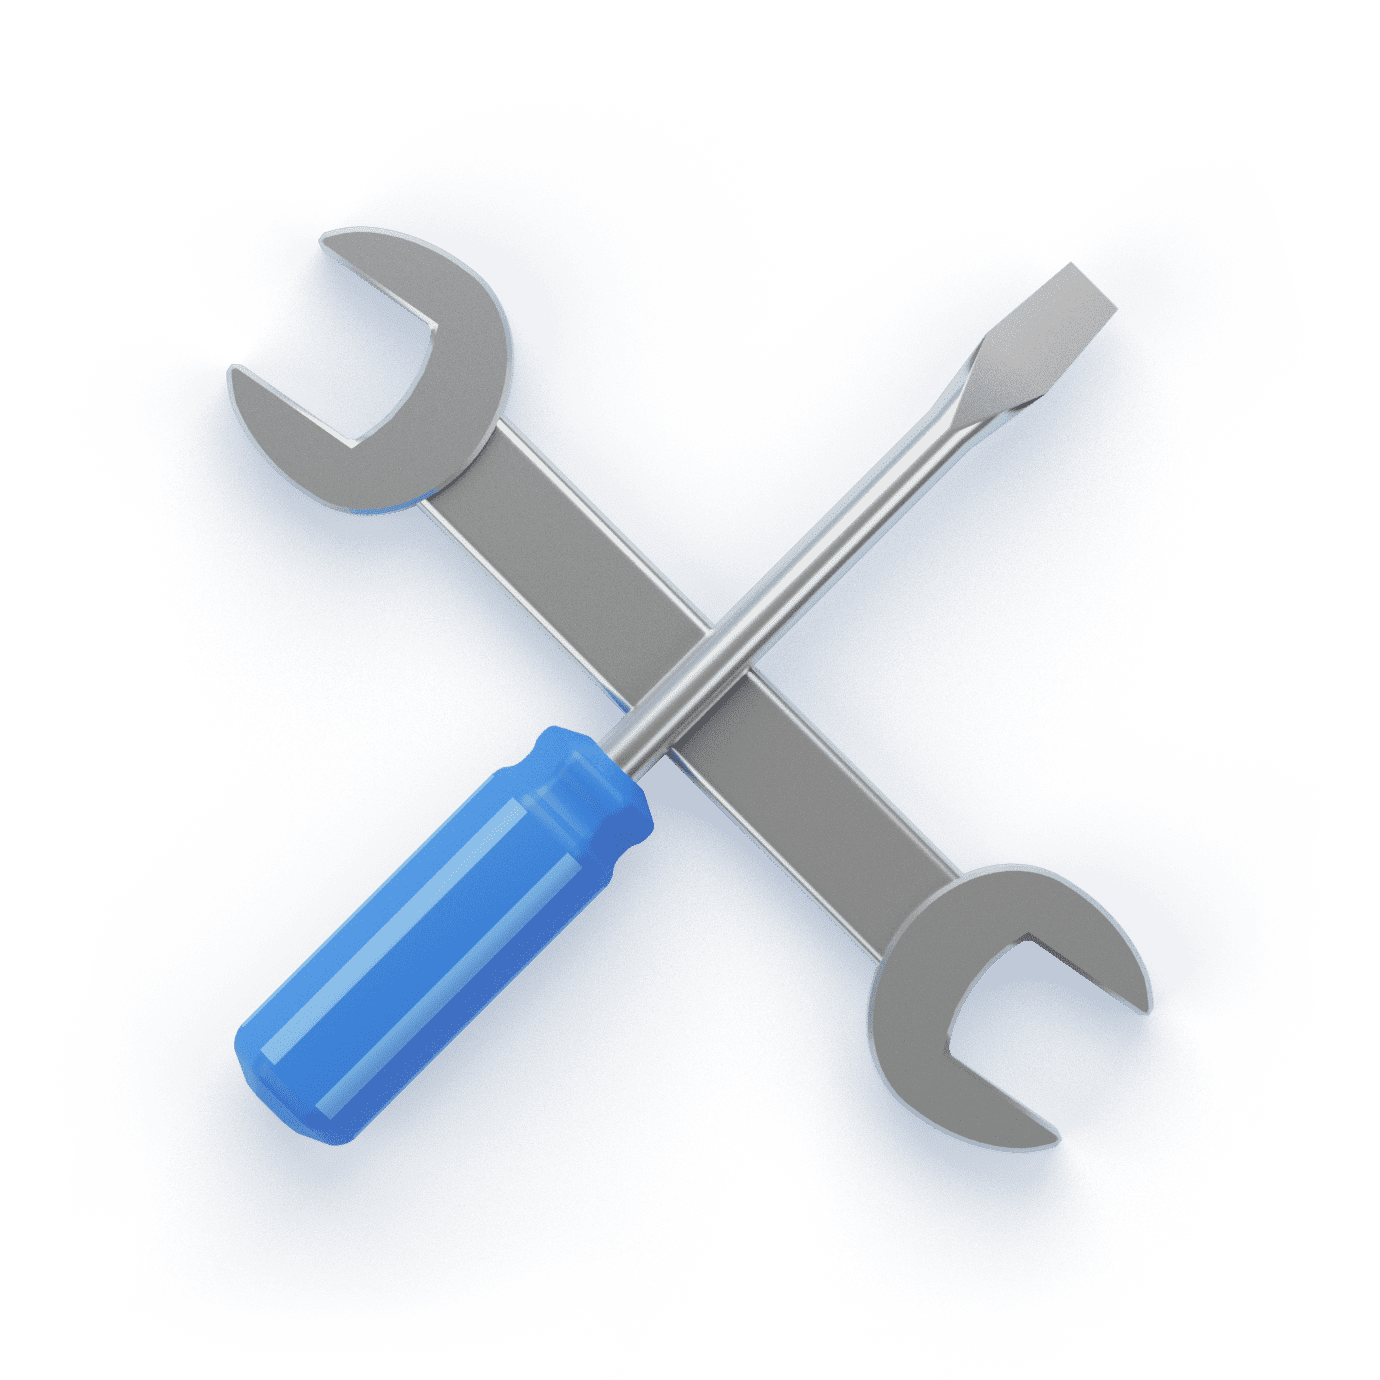 Support image with screwdriver and wrench